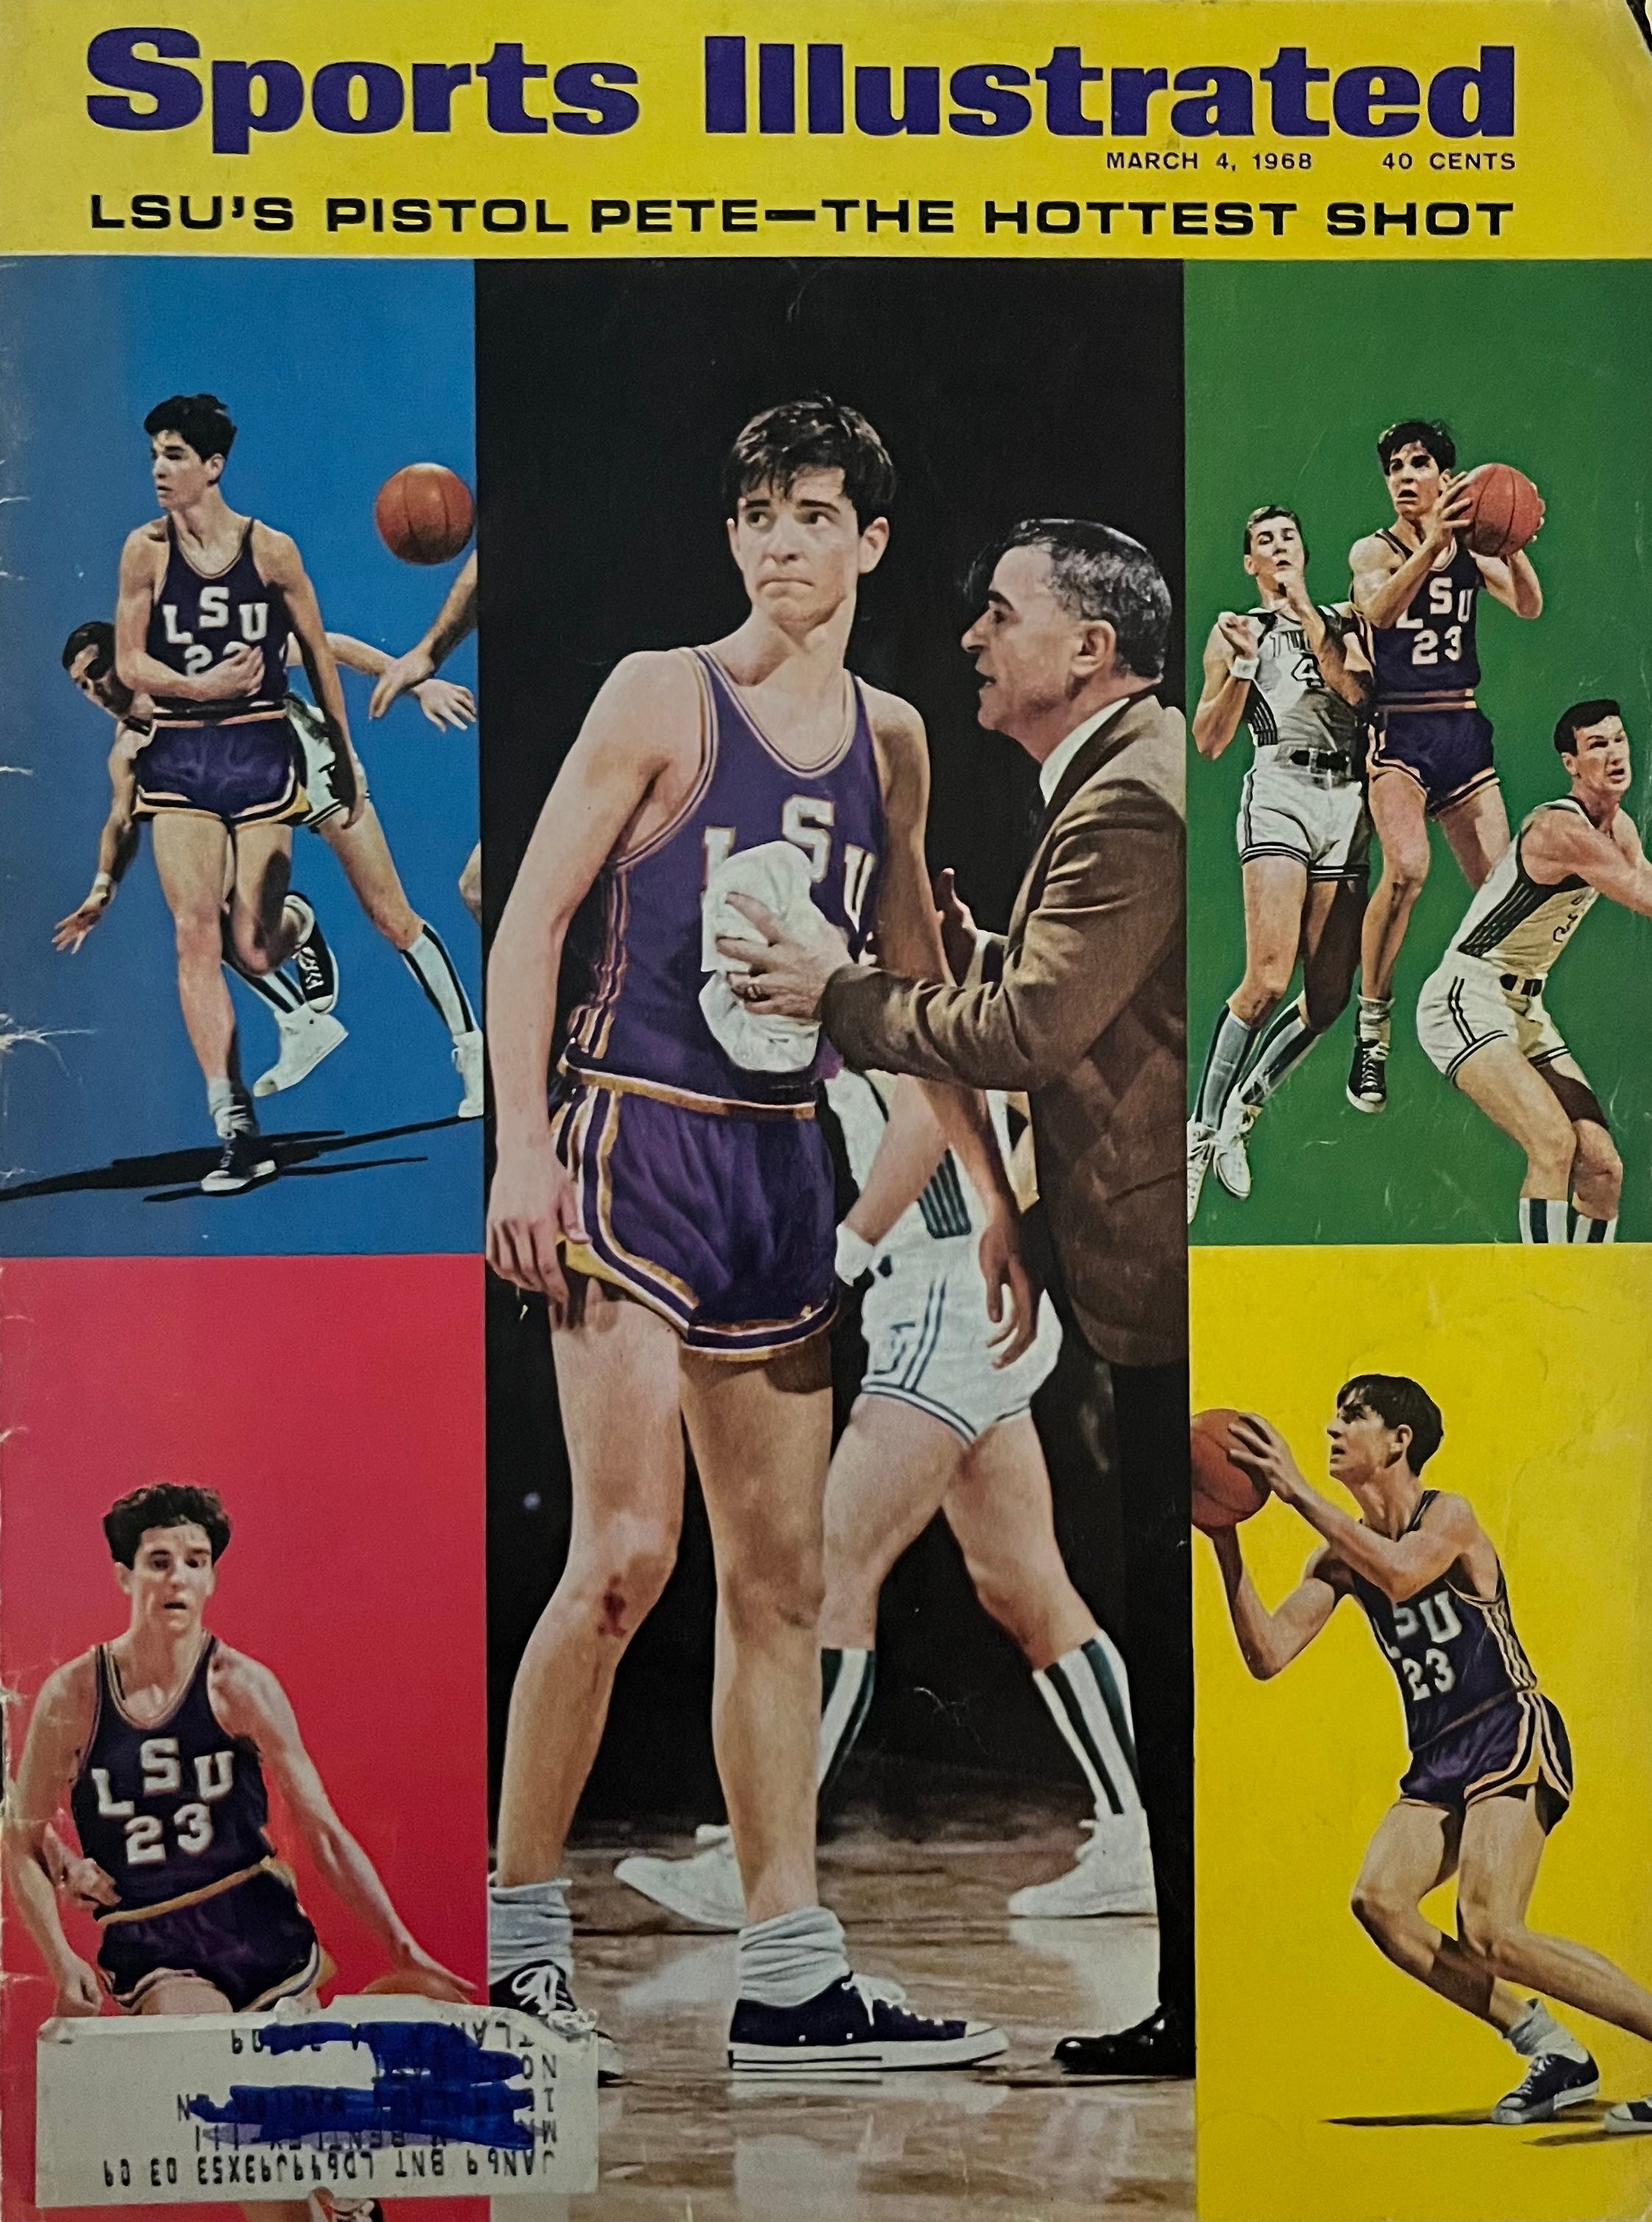 Pete Maravich and Bob Dylan: Courting Dignity